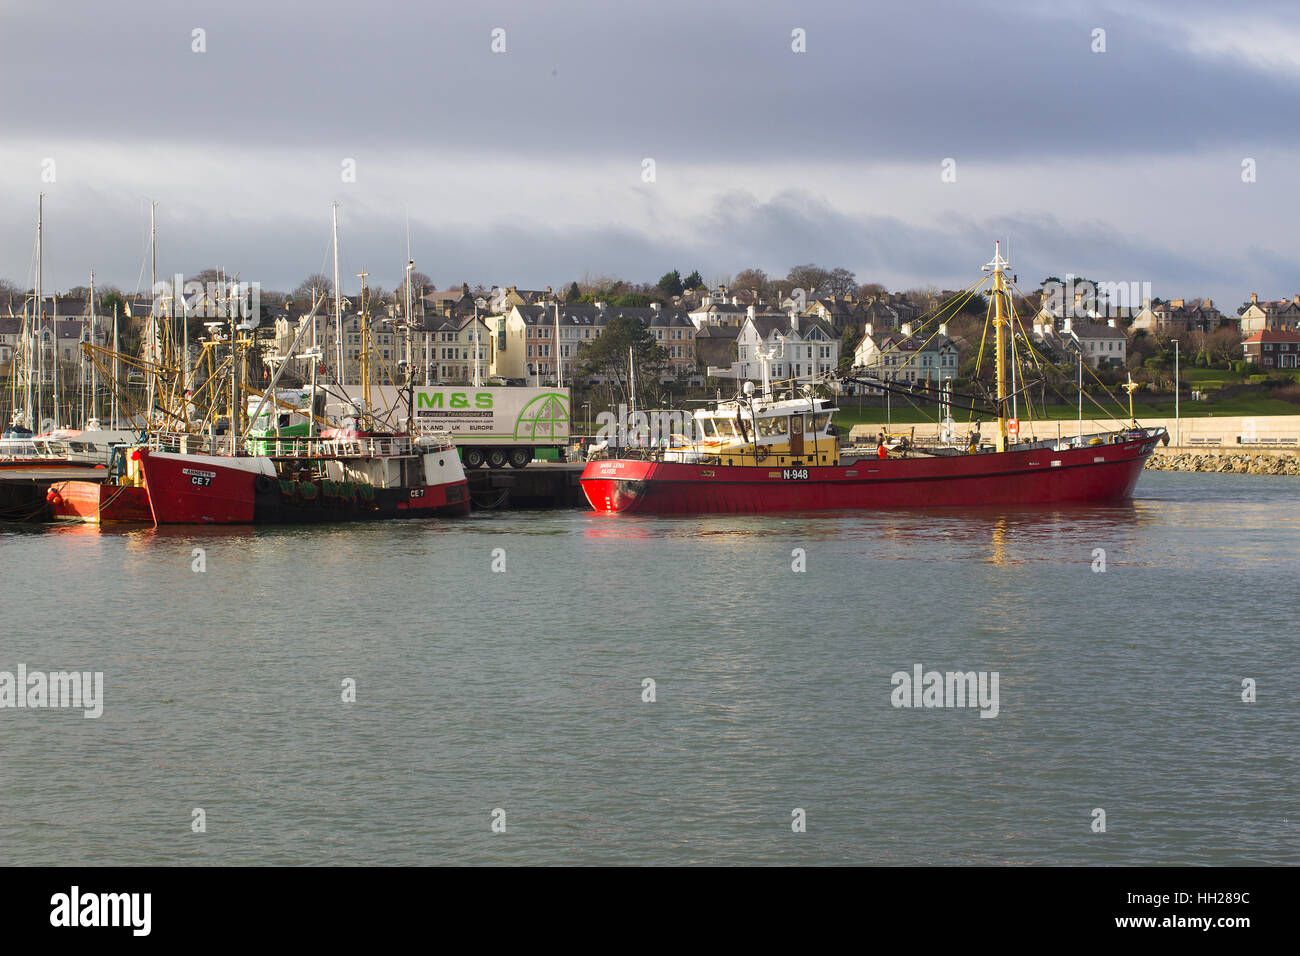 The trawler Maria Lena of Kilkeel manoeuvres to her berth in the harbor in Bangor Northern Ireland on a pleasant winter's day Stock Photo